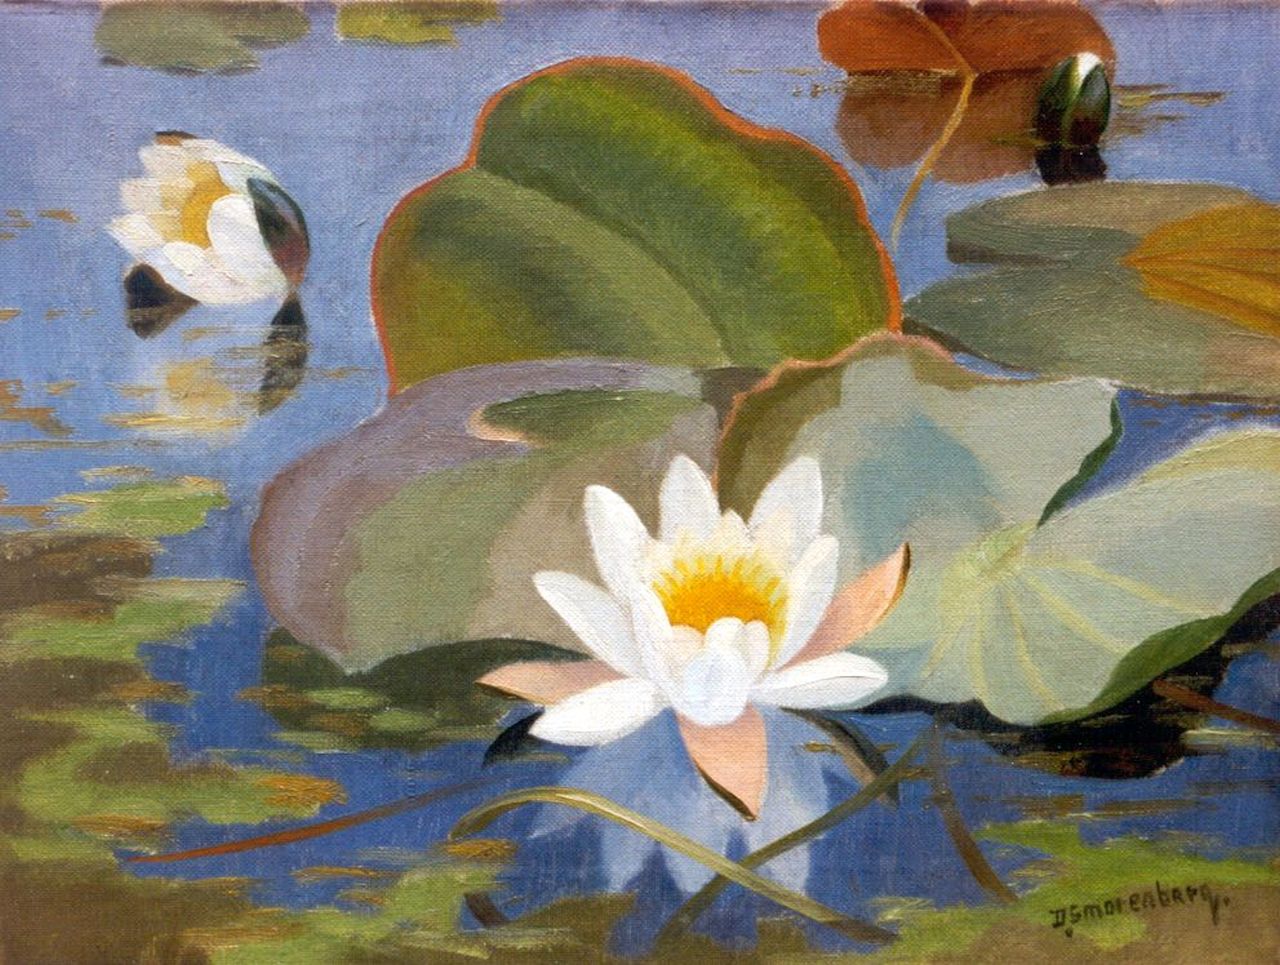 Smorenberg D.  | Dirk Smorenberg, Water lilies, oil on canvas 30.5 x 40.5 cm, signed l.r.